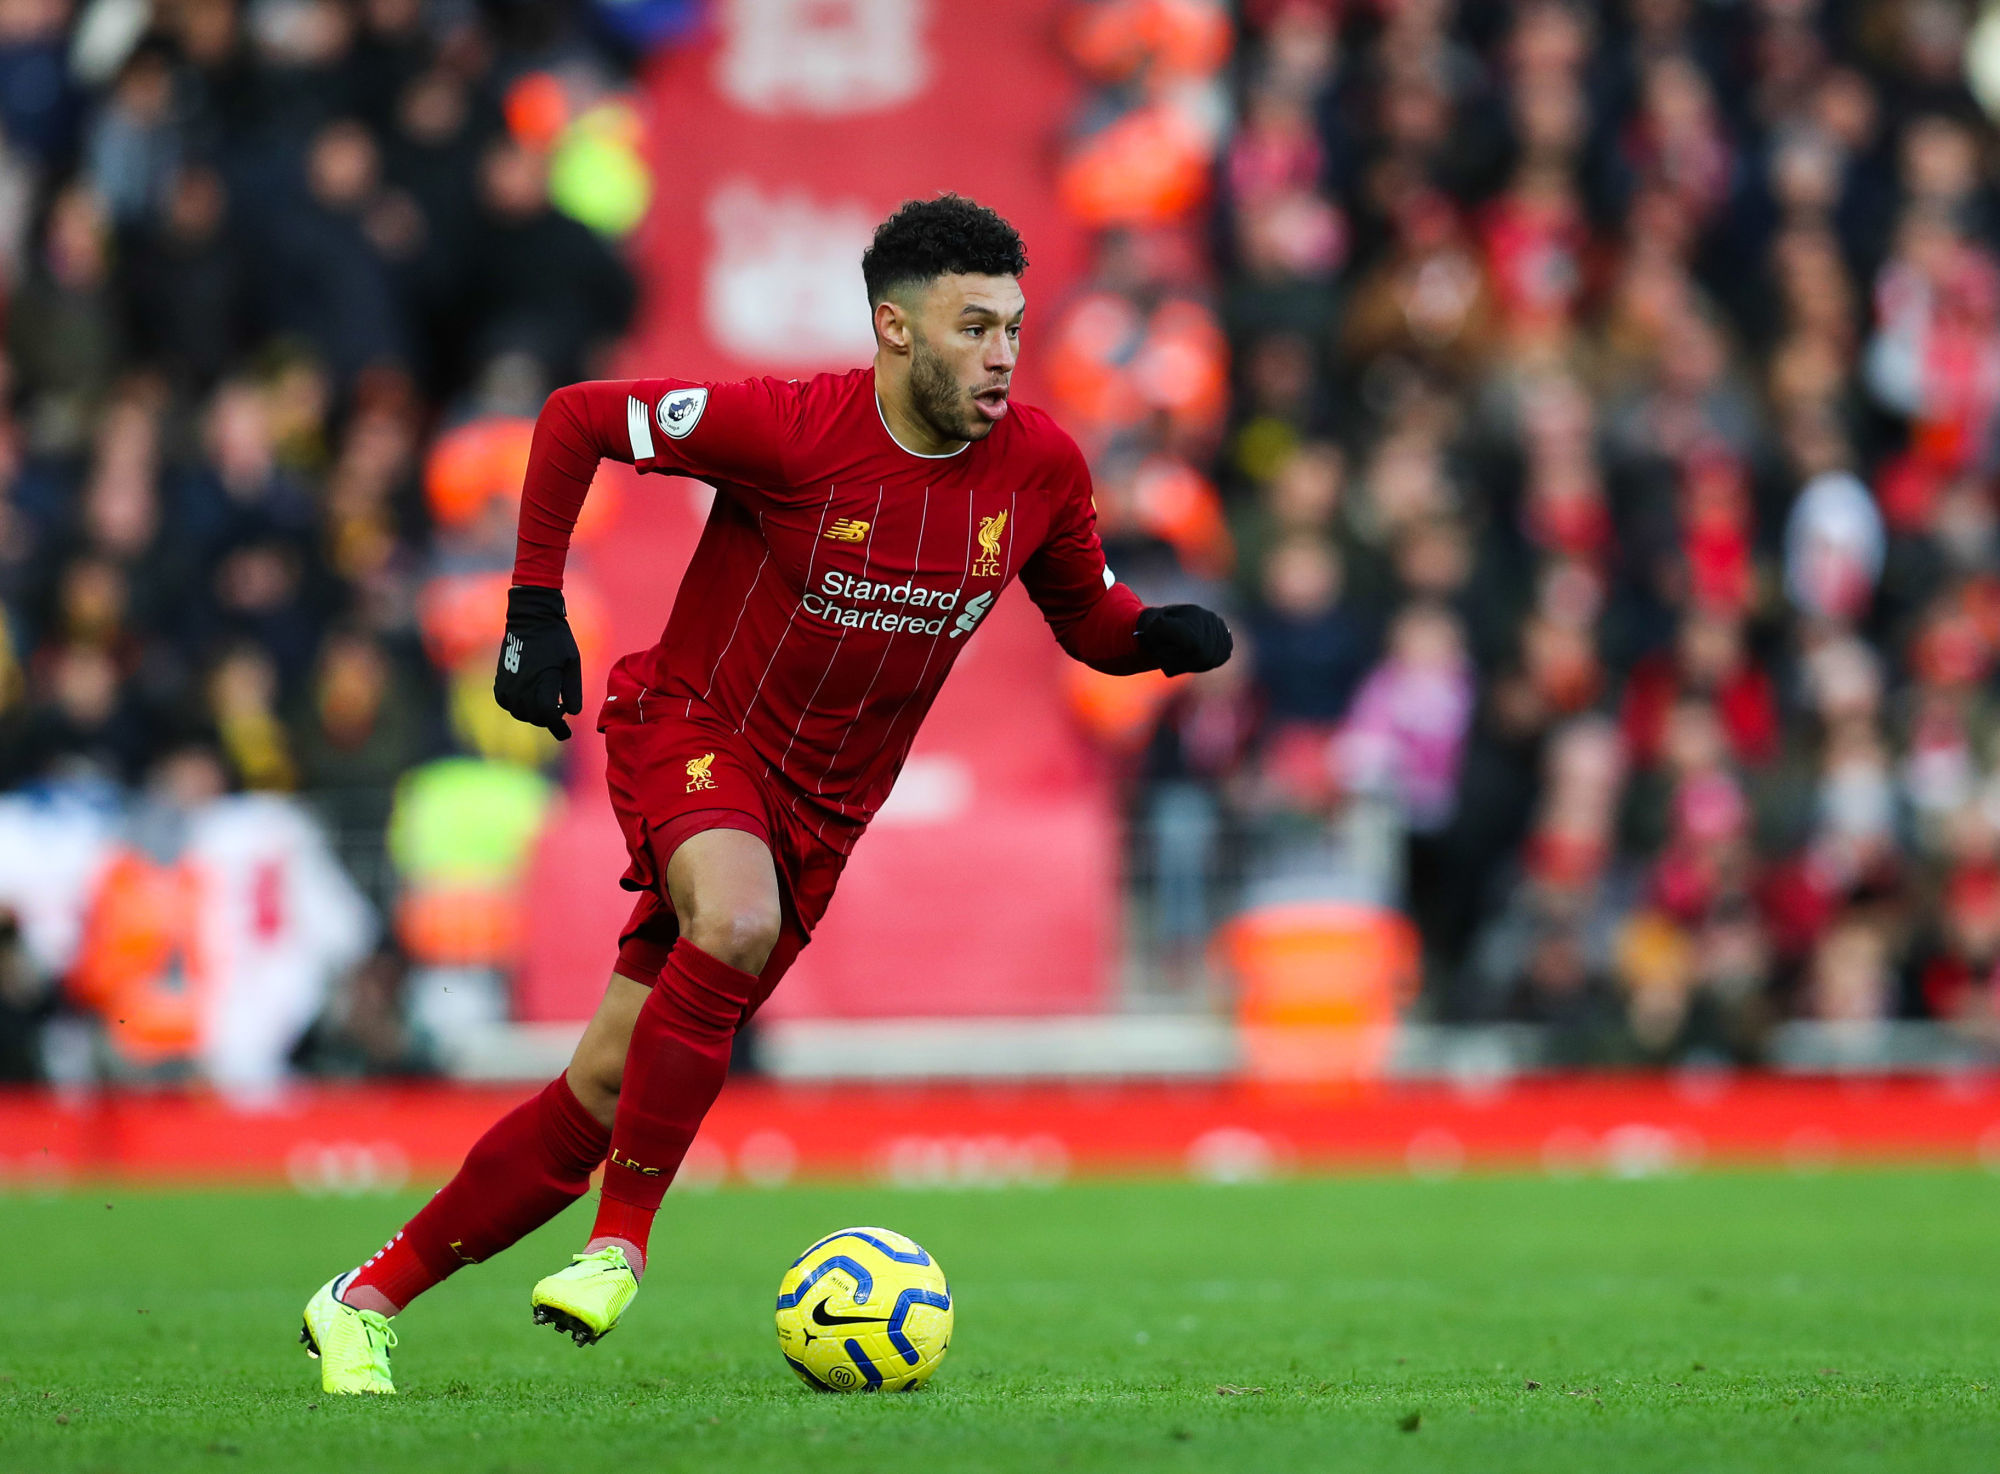 14th December 2019; Anfield, Liverpool, Merseyside, England; English Premier League Football, Liverpool versus Watford; Alex Oxlade-Chamberlain of Liverpool races forward with the ball - Strictly Editorial Use Only. No use with unauthorized audio, video, data, fixture lists, club/league logos or 'live' services. Online in-match use limited to 120 images, no video emulation. No use in betting, games or single club/league/player publications 

Photo by Icon Sport - Alex OXLADE-CHAMBERLAIN - Anfield Road - Liverpool (Angleterre)